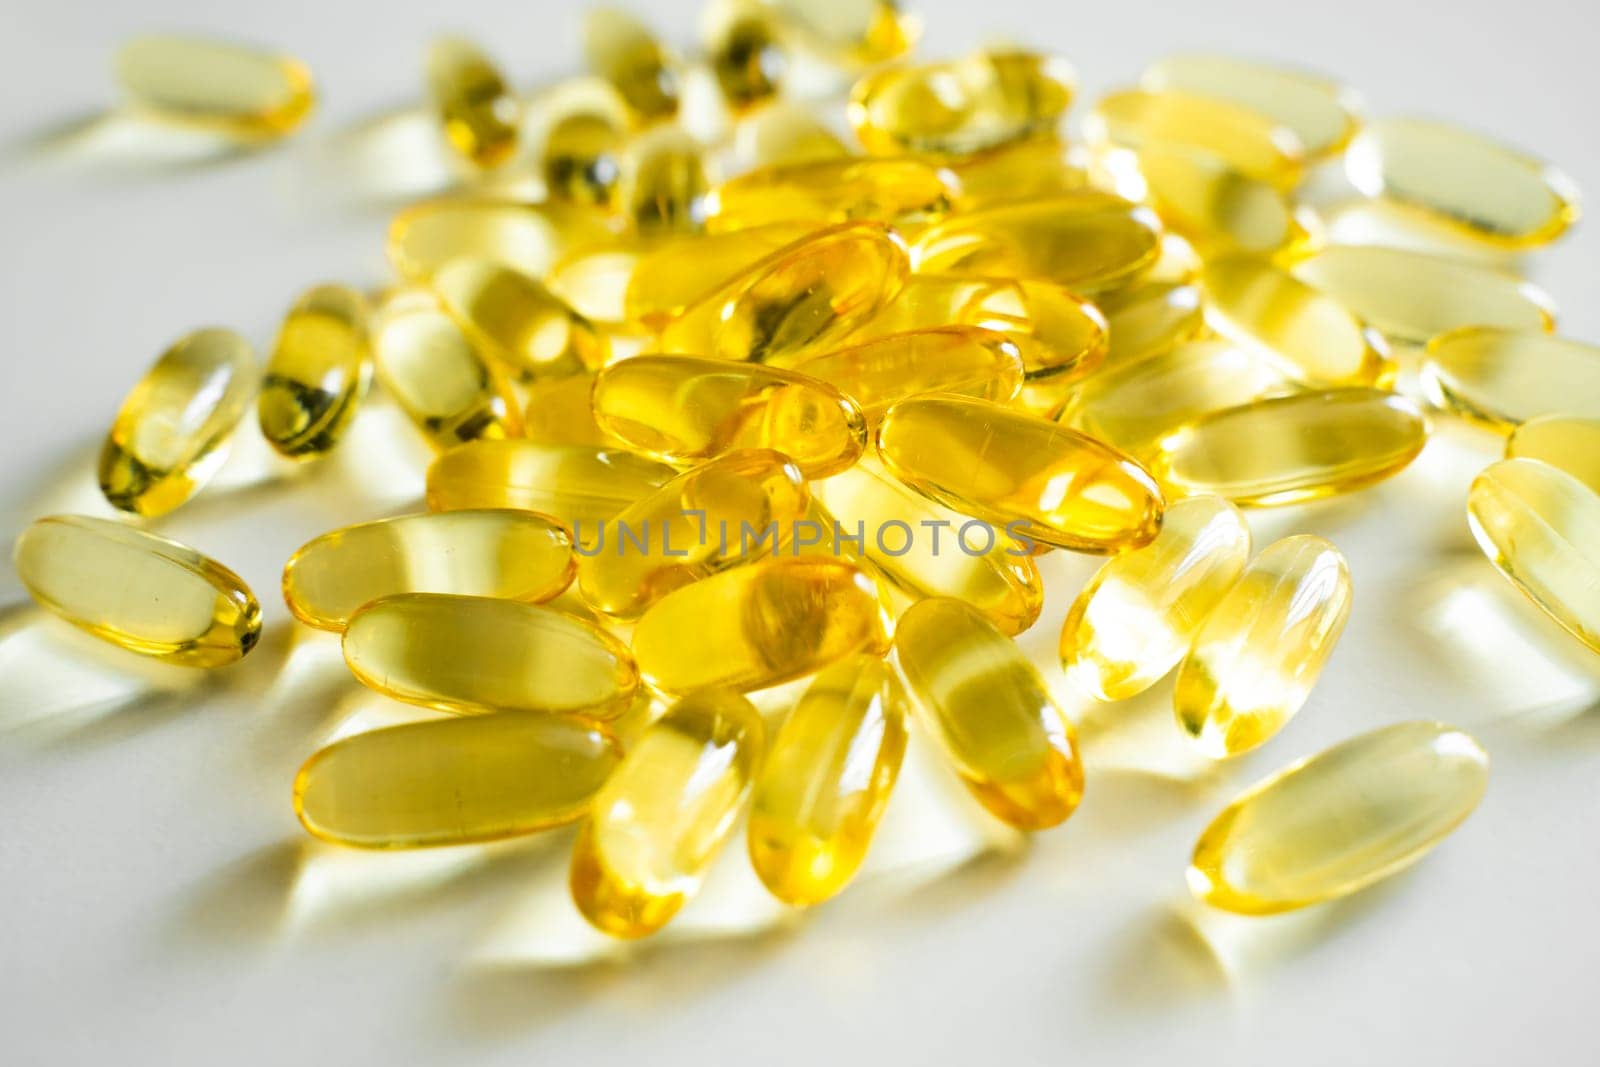 Golden color fish oil supplement in soft gel capsule on white background. Healthy vitamins, omega 3. Oil filled capsules of food supplements